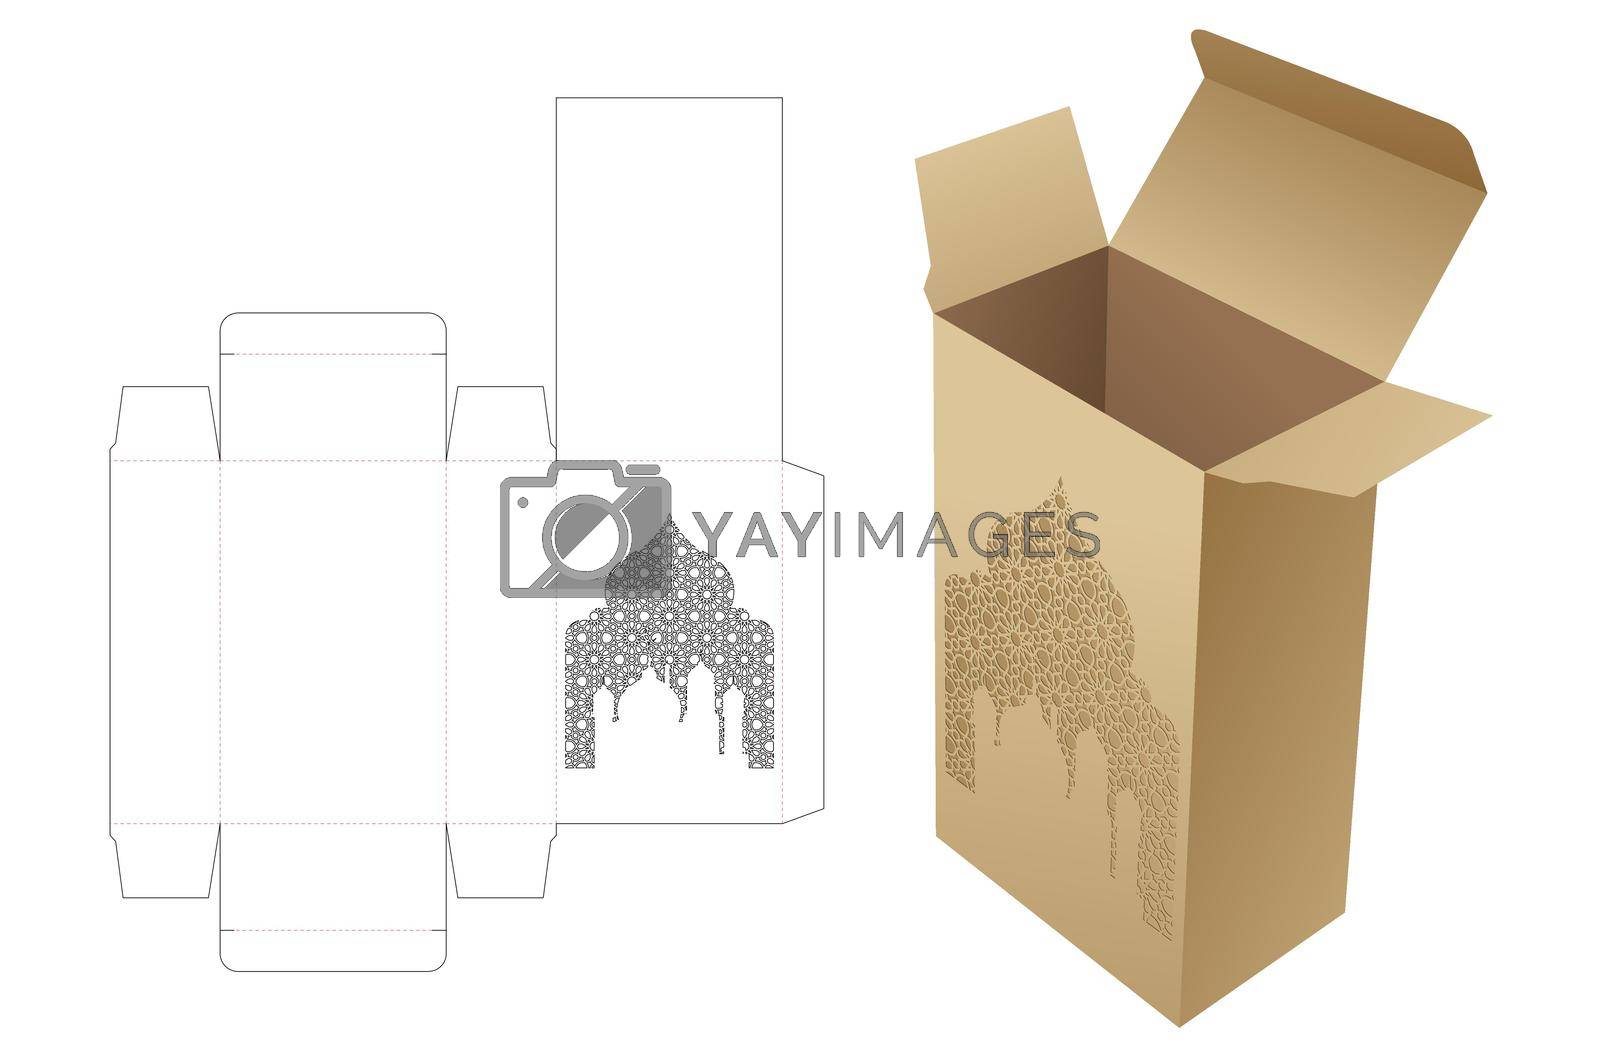 Royalty free image of Arabic pattern box die cut template and 3D mockup by valueinvestor